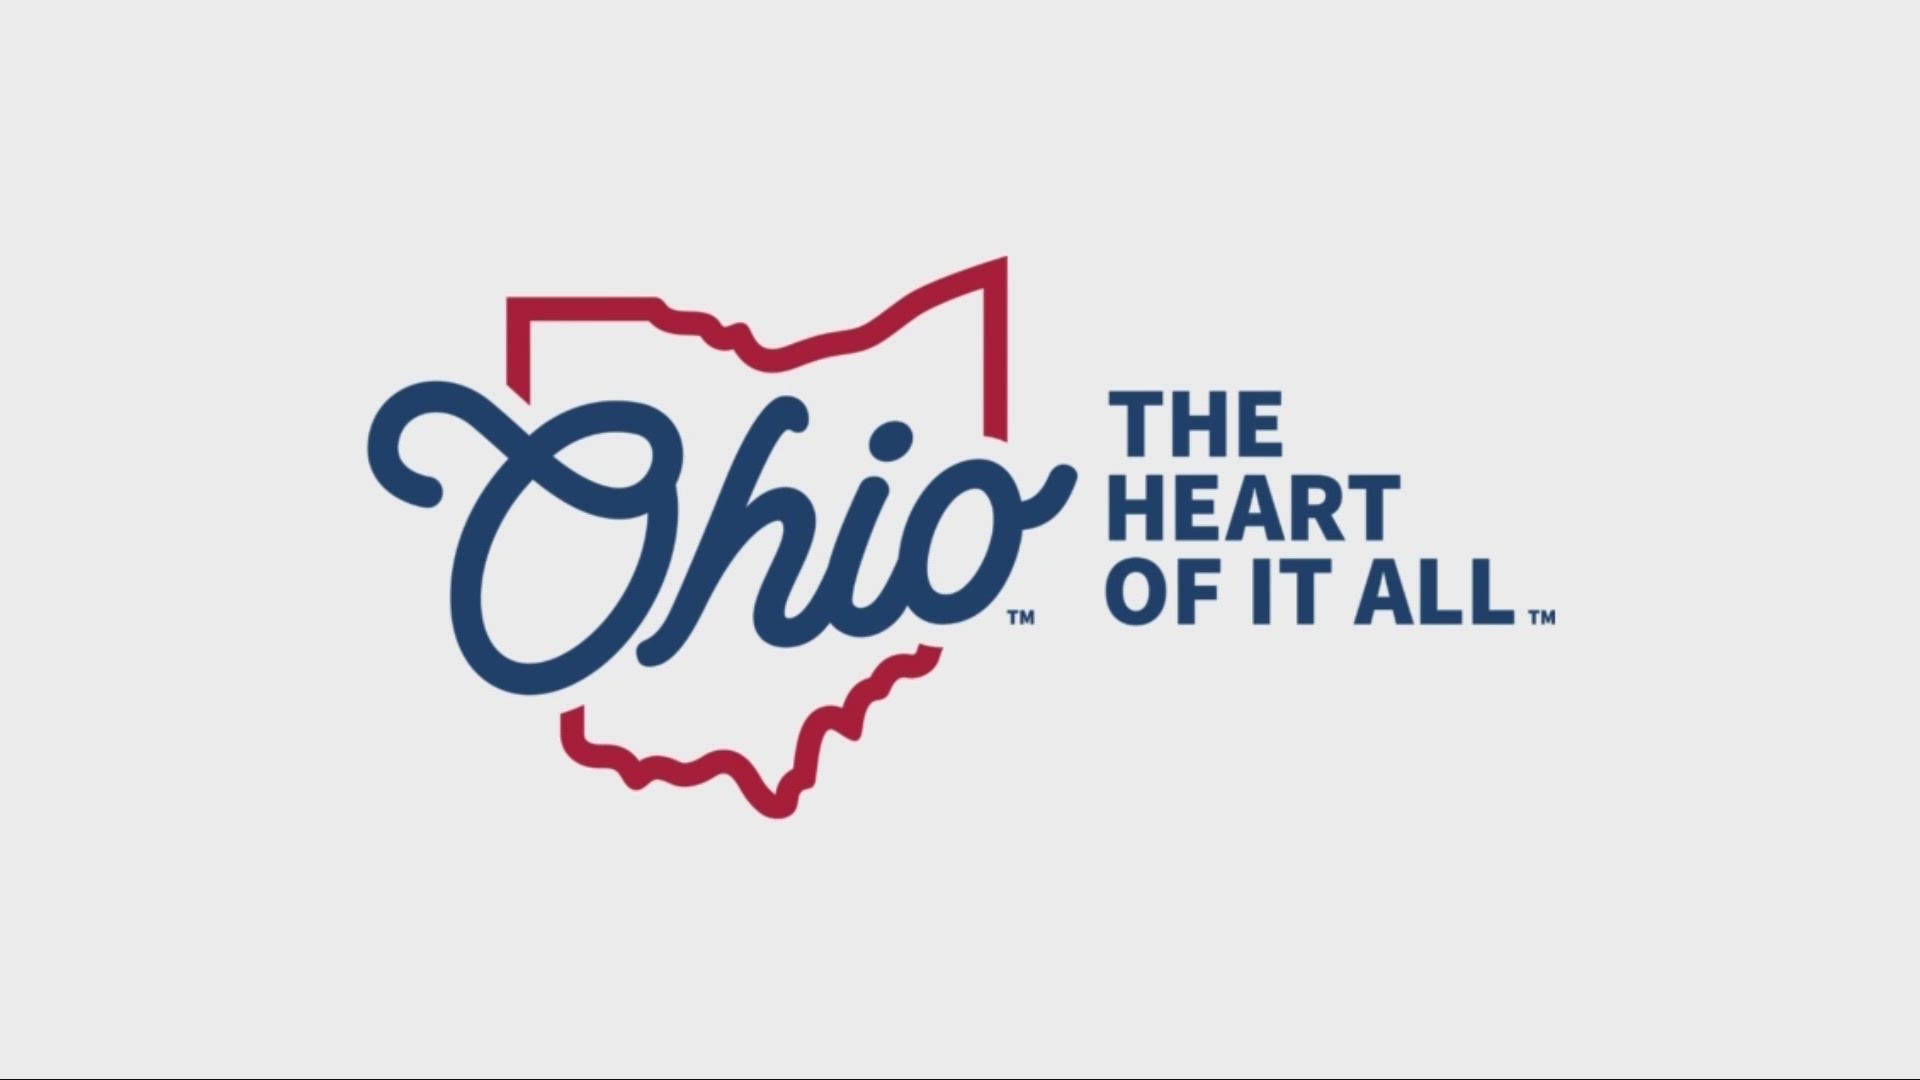 Our new state tourism slogan they’ve decided to reintroduce an old favorite that we used from 1984-2001, “Ohio. The Heart Of It All”.